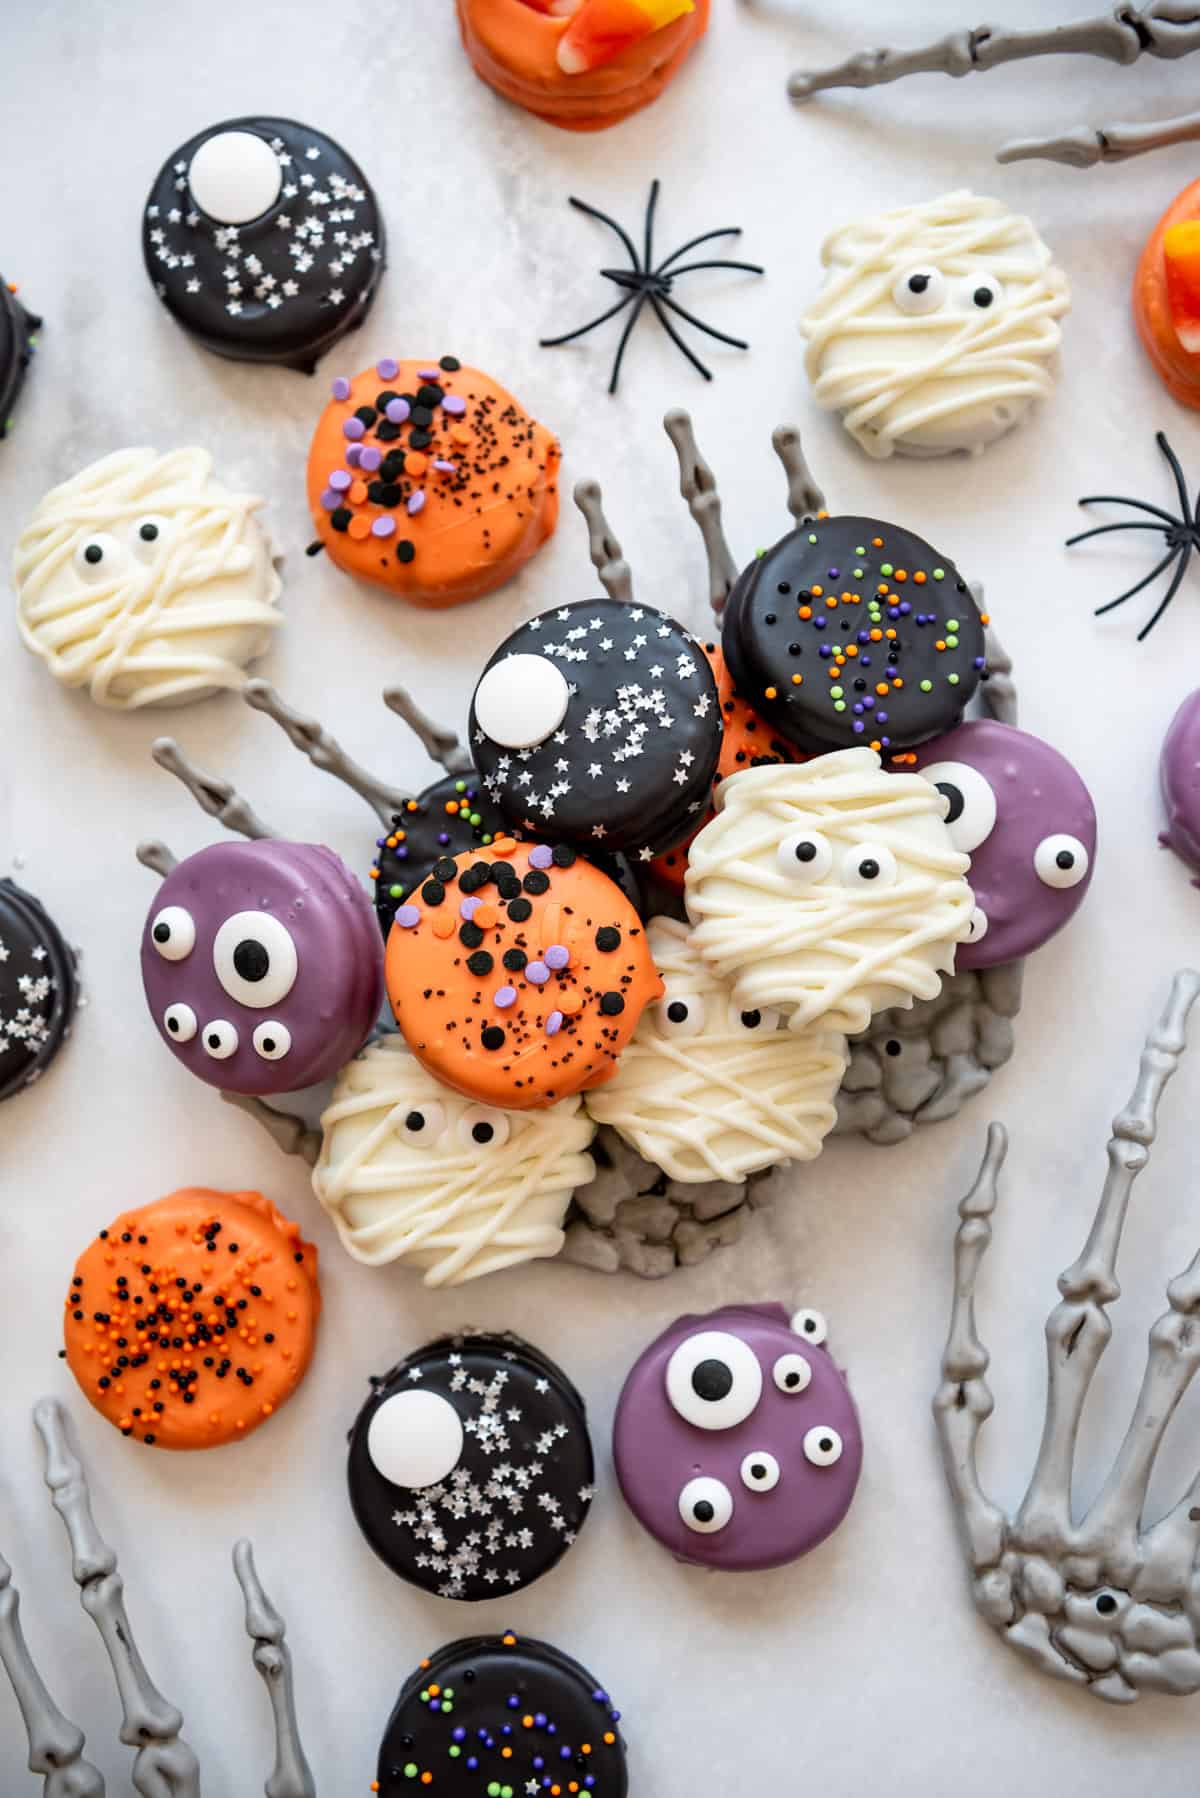 Chocolate covered Oreos decorated in Halloween colors and sprinkles surrounded by plastic spiders and plastic skeleton hands.